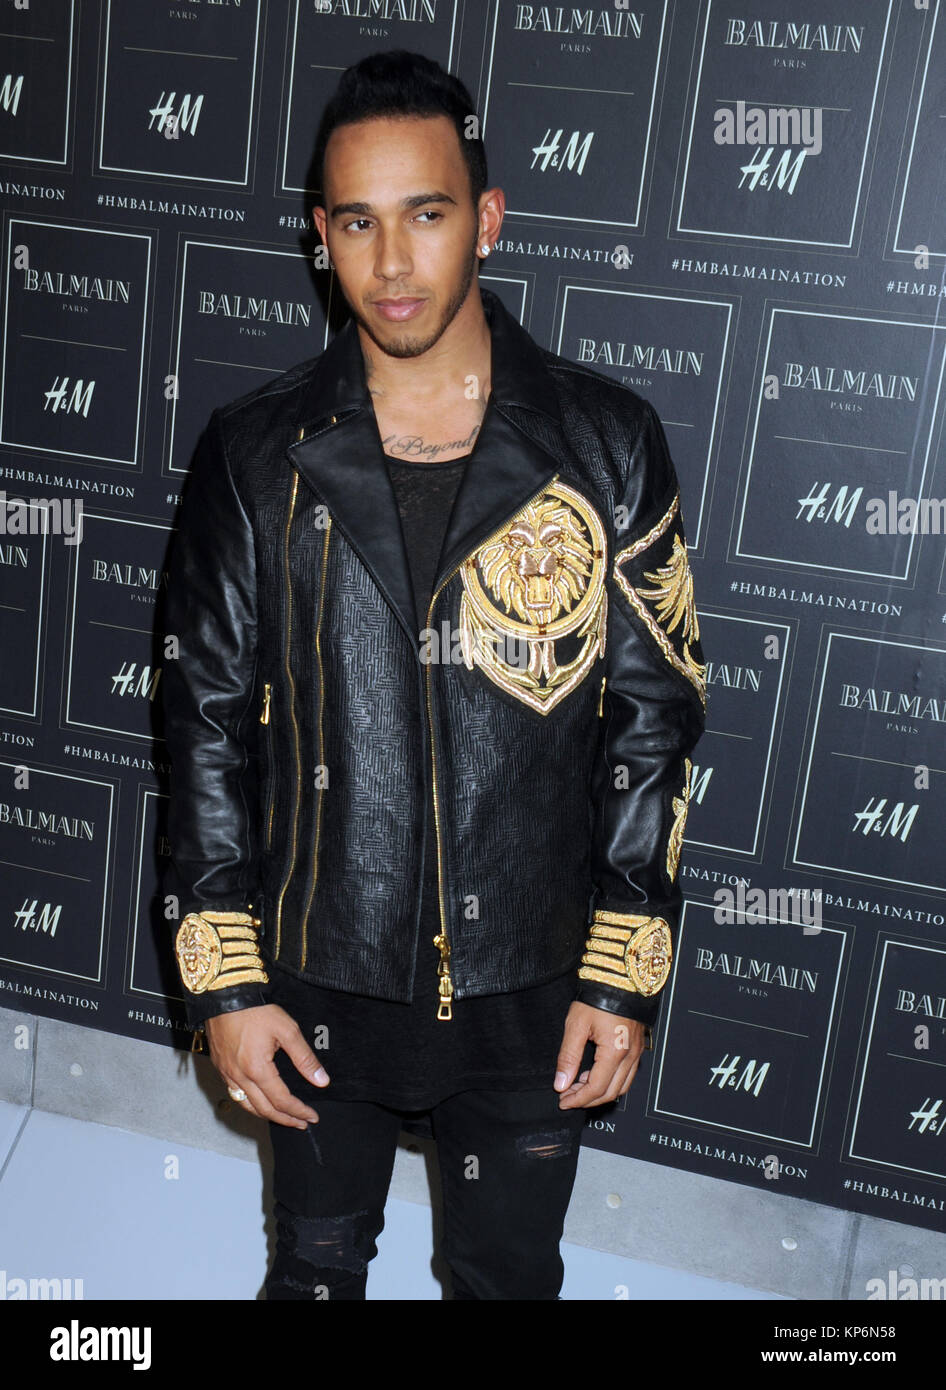 NEW YORK, NY OCTOBER 20: Lewis Hamilton at the BALMAIN X H&M collection launch at 23 Street on October 20, 2015 in York City. People: Lewis Hamilton Stock Photo - Alamy